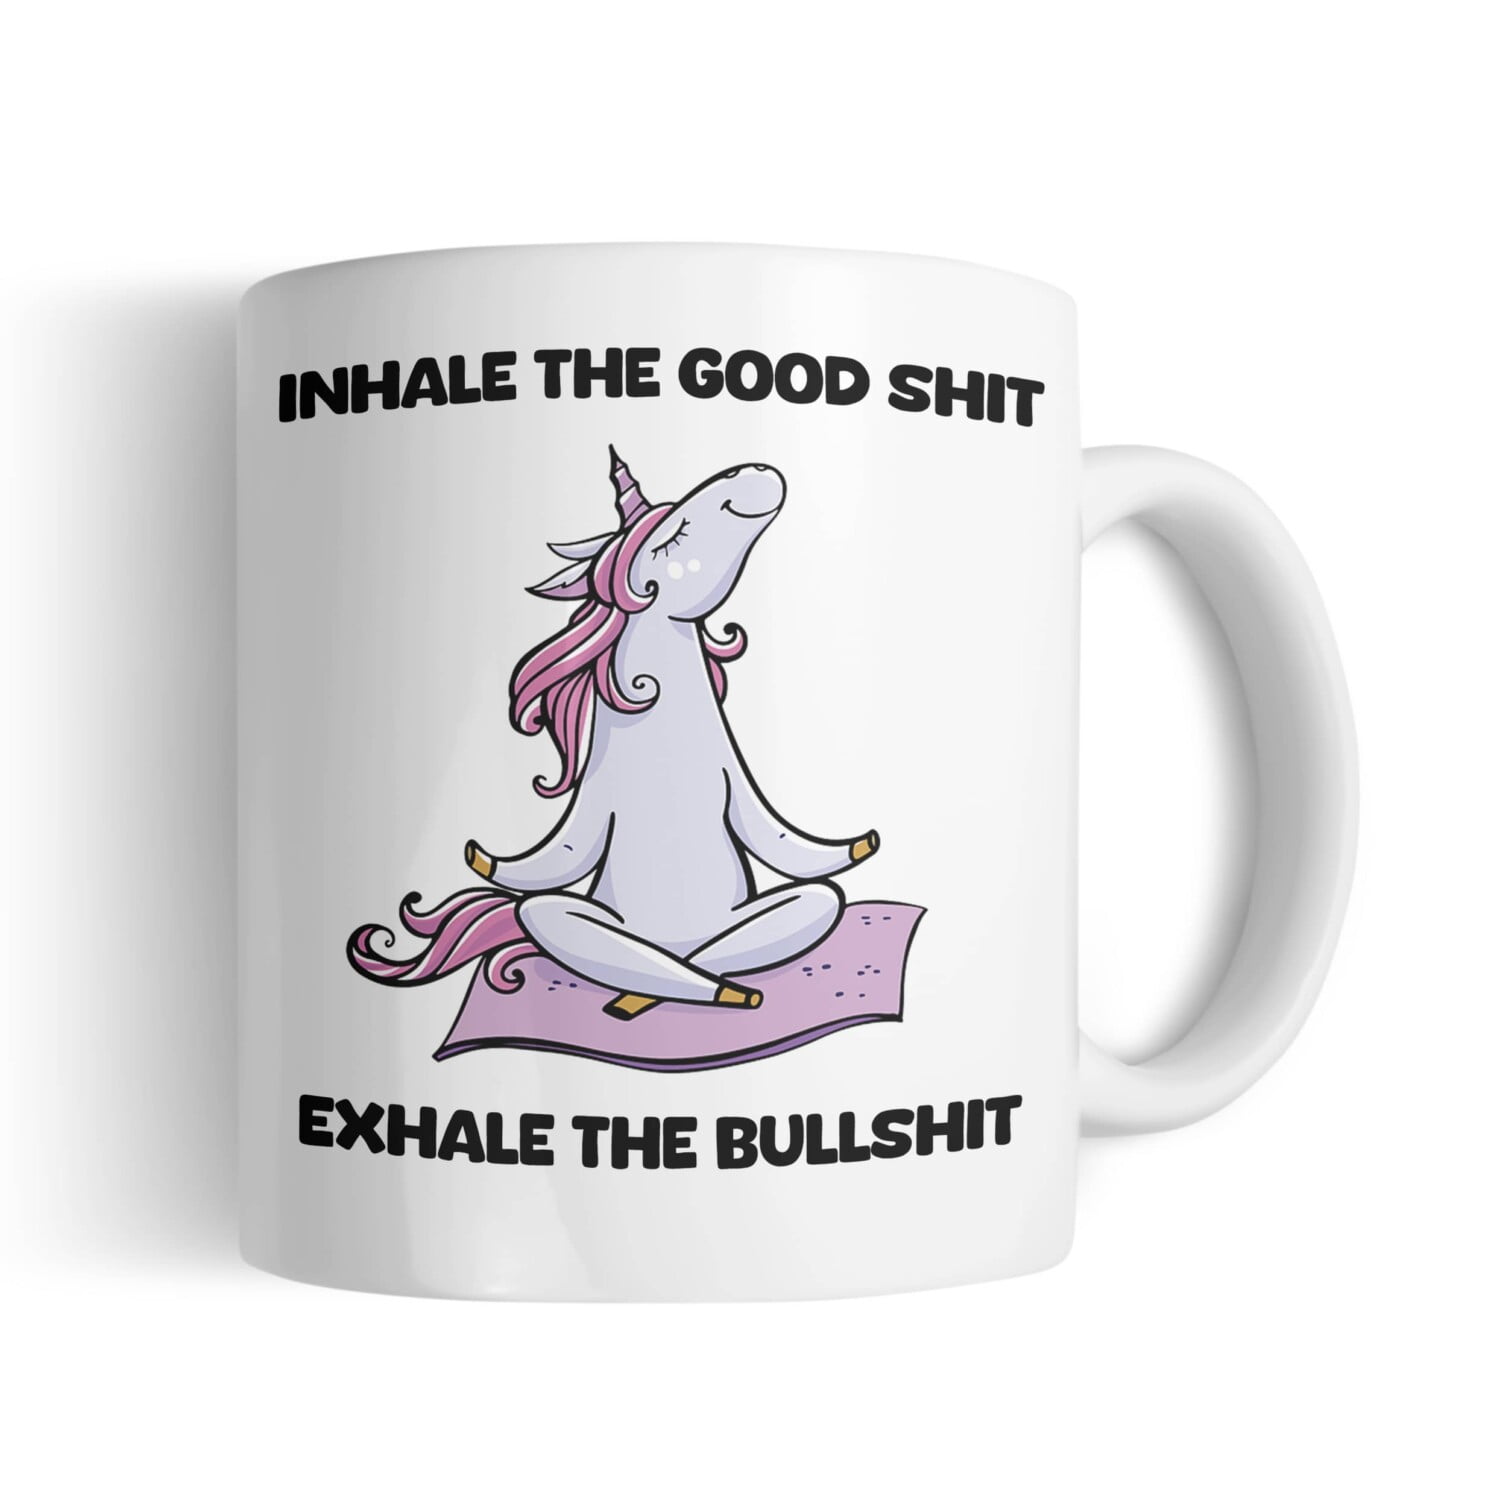 Inhale the Good Shit, Exhale the Bullshit Mug, Printing in County Monaghan, Ireland by Design Gaff